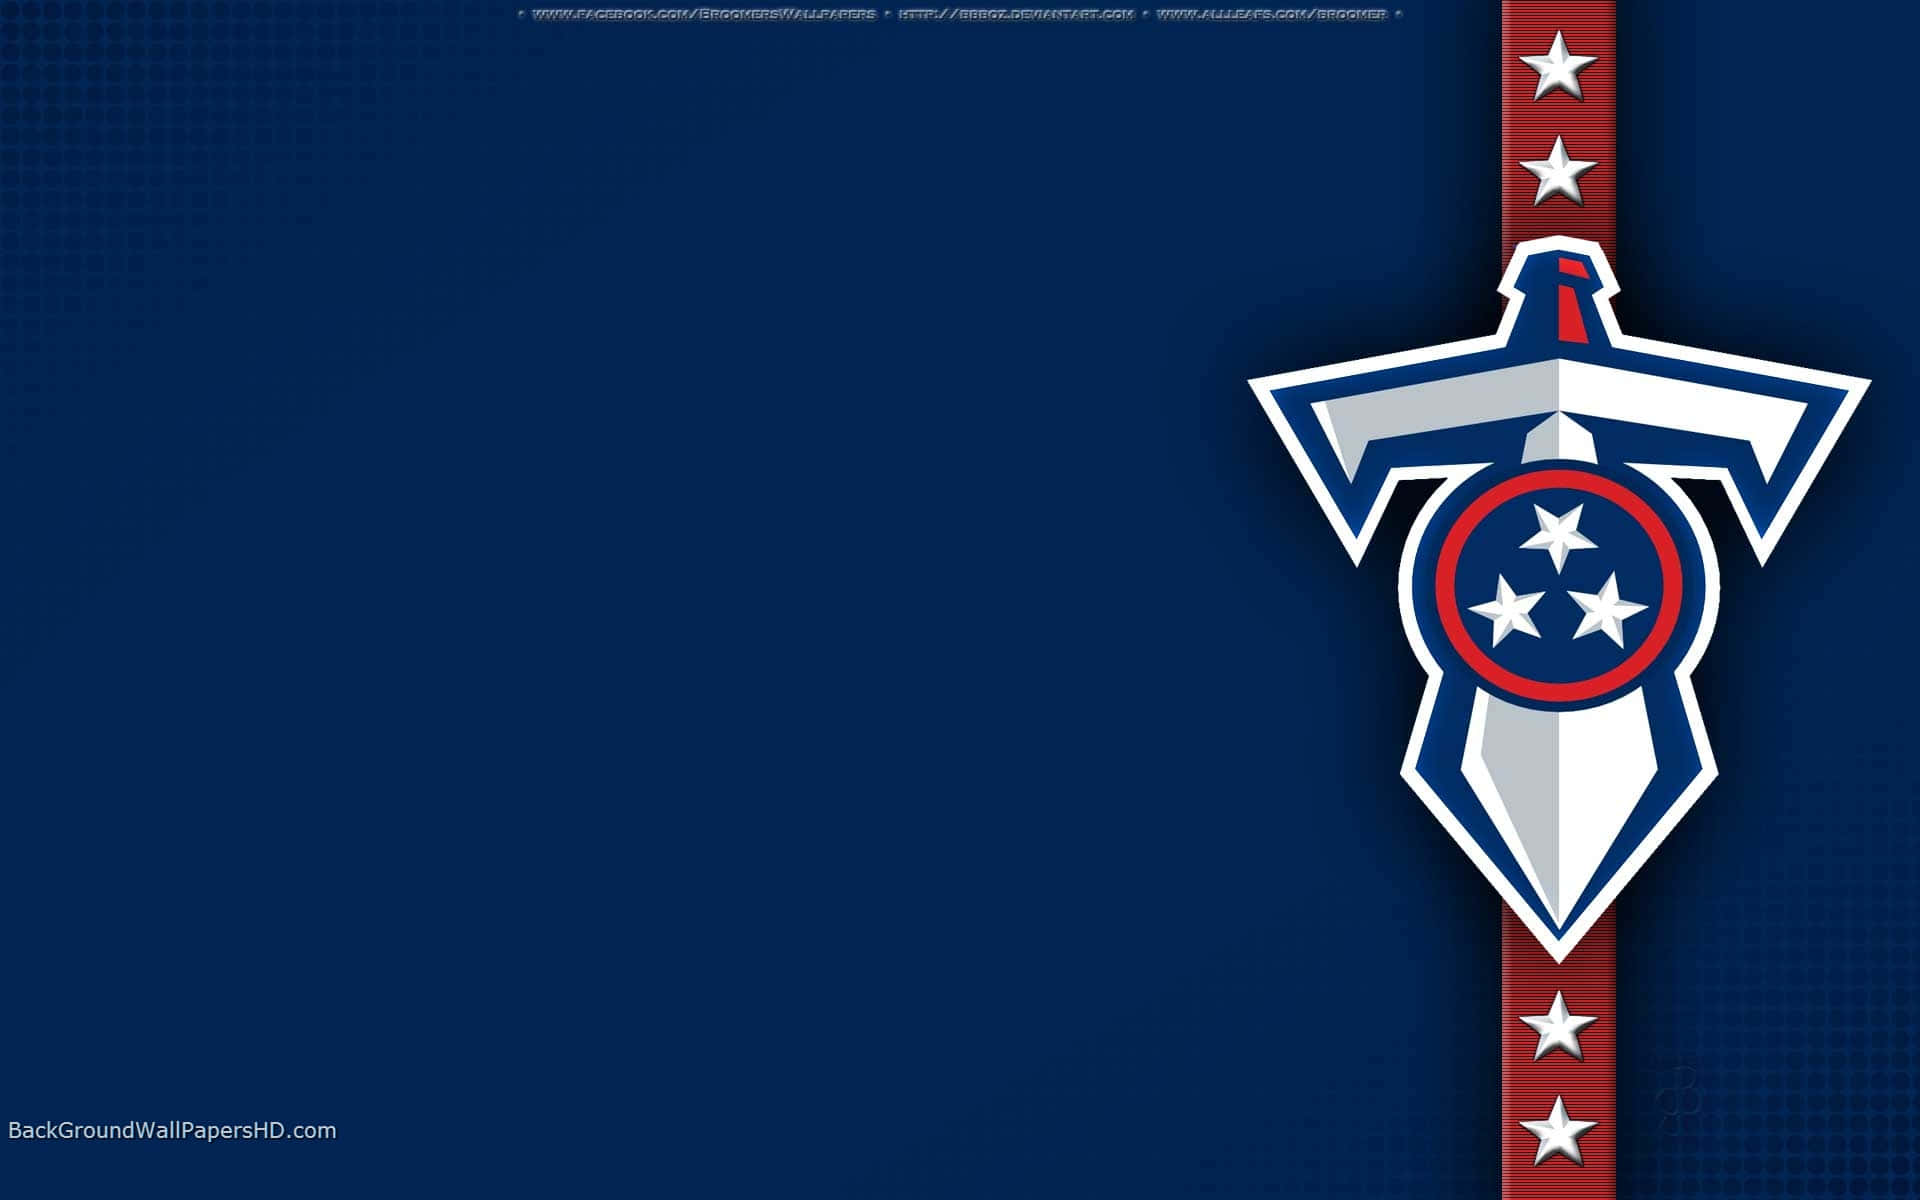 Celebrate your team spirit with the new TN Titans iPhone Wallpaper